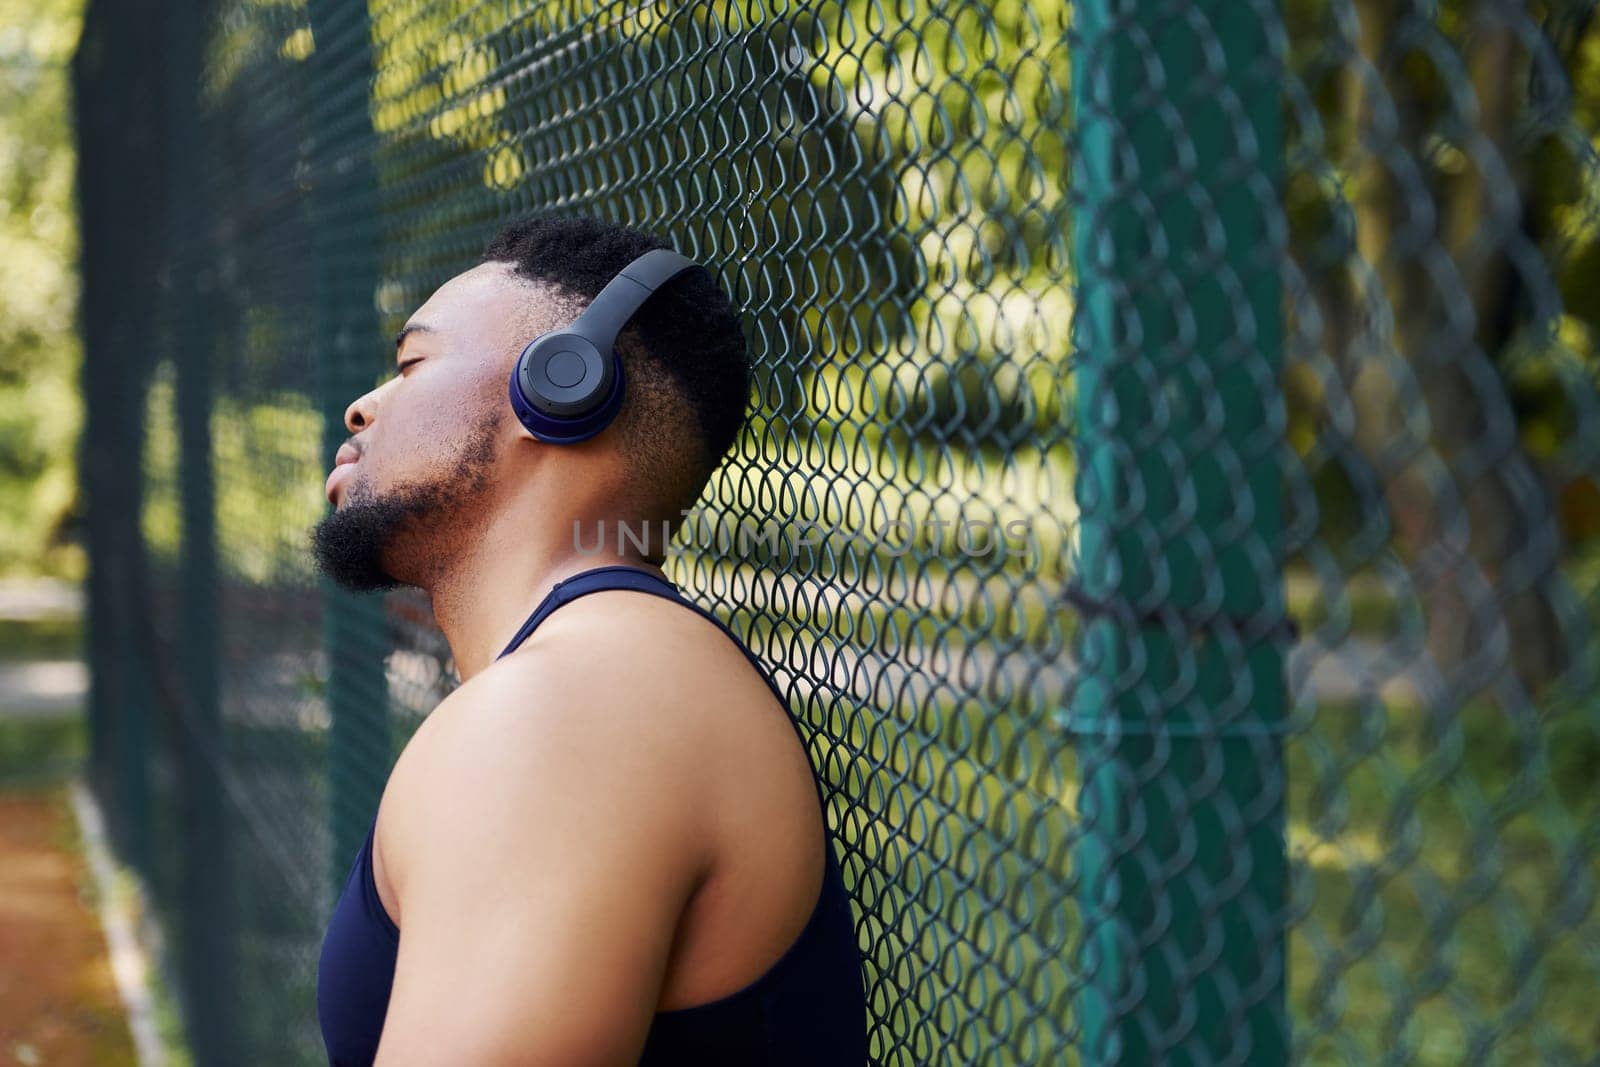 African american guy in wireless headphones leans on the metal mesh of sportive court and takes break by Standret